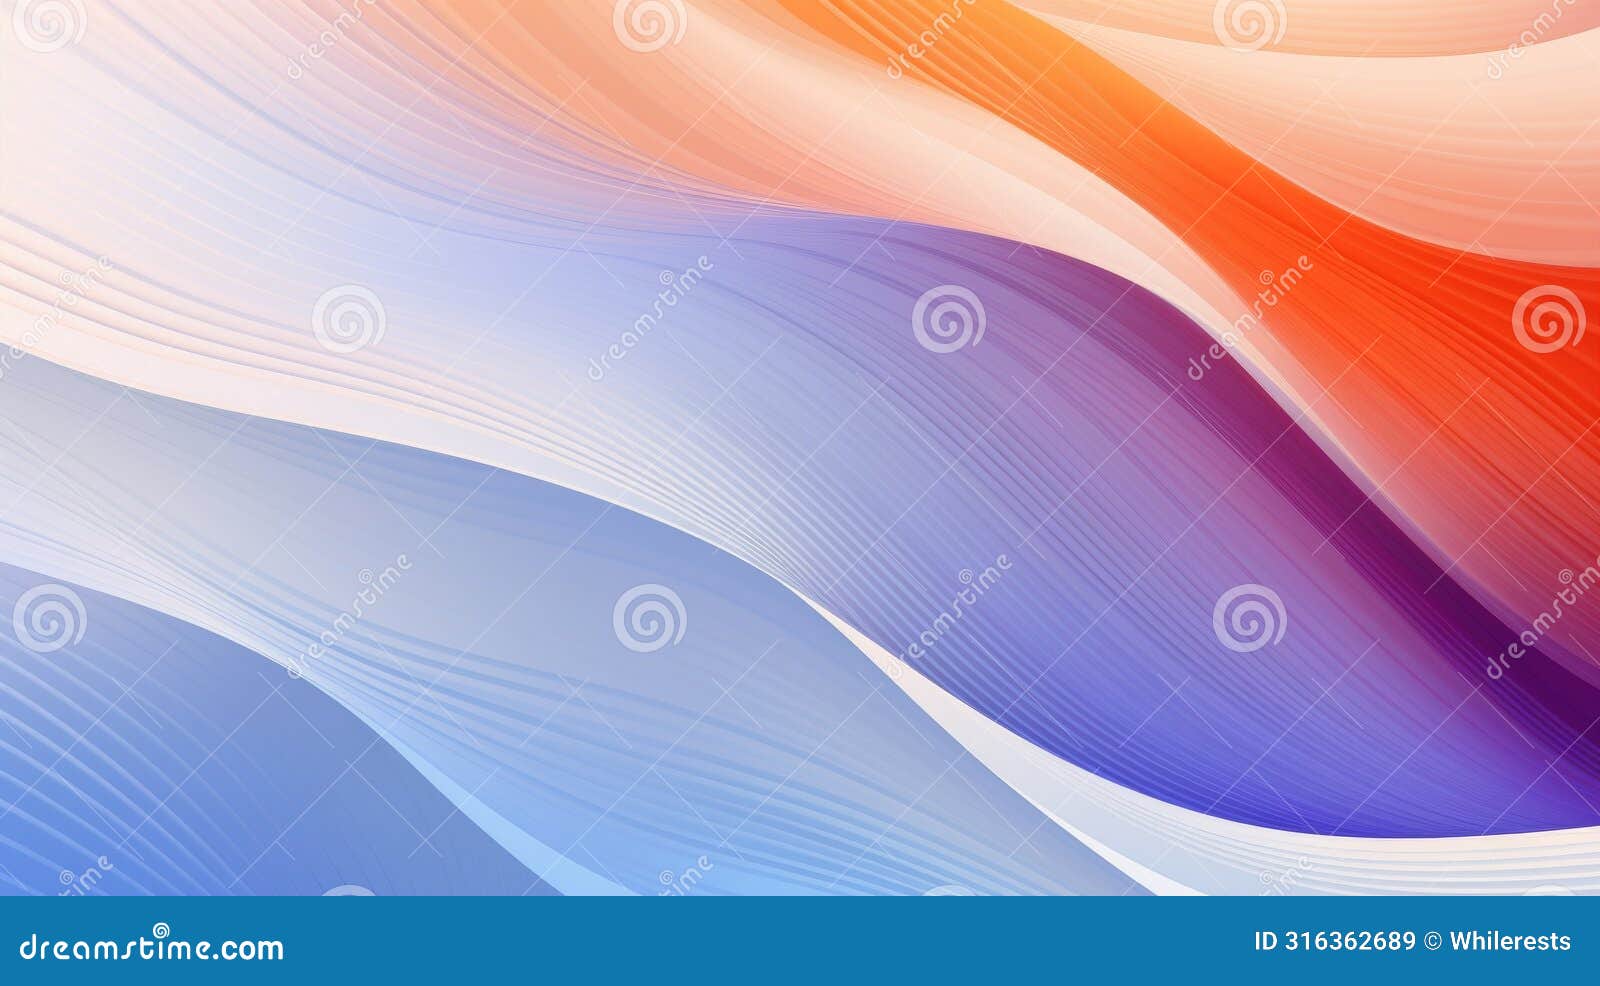 cool toned abstract swirl background with blue and purple hues